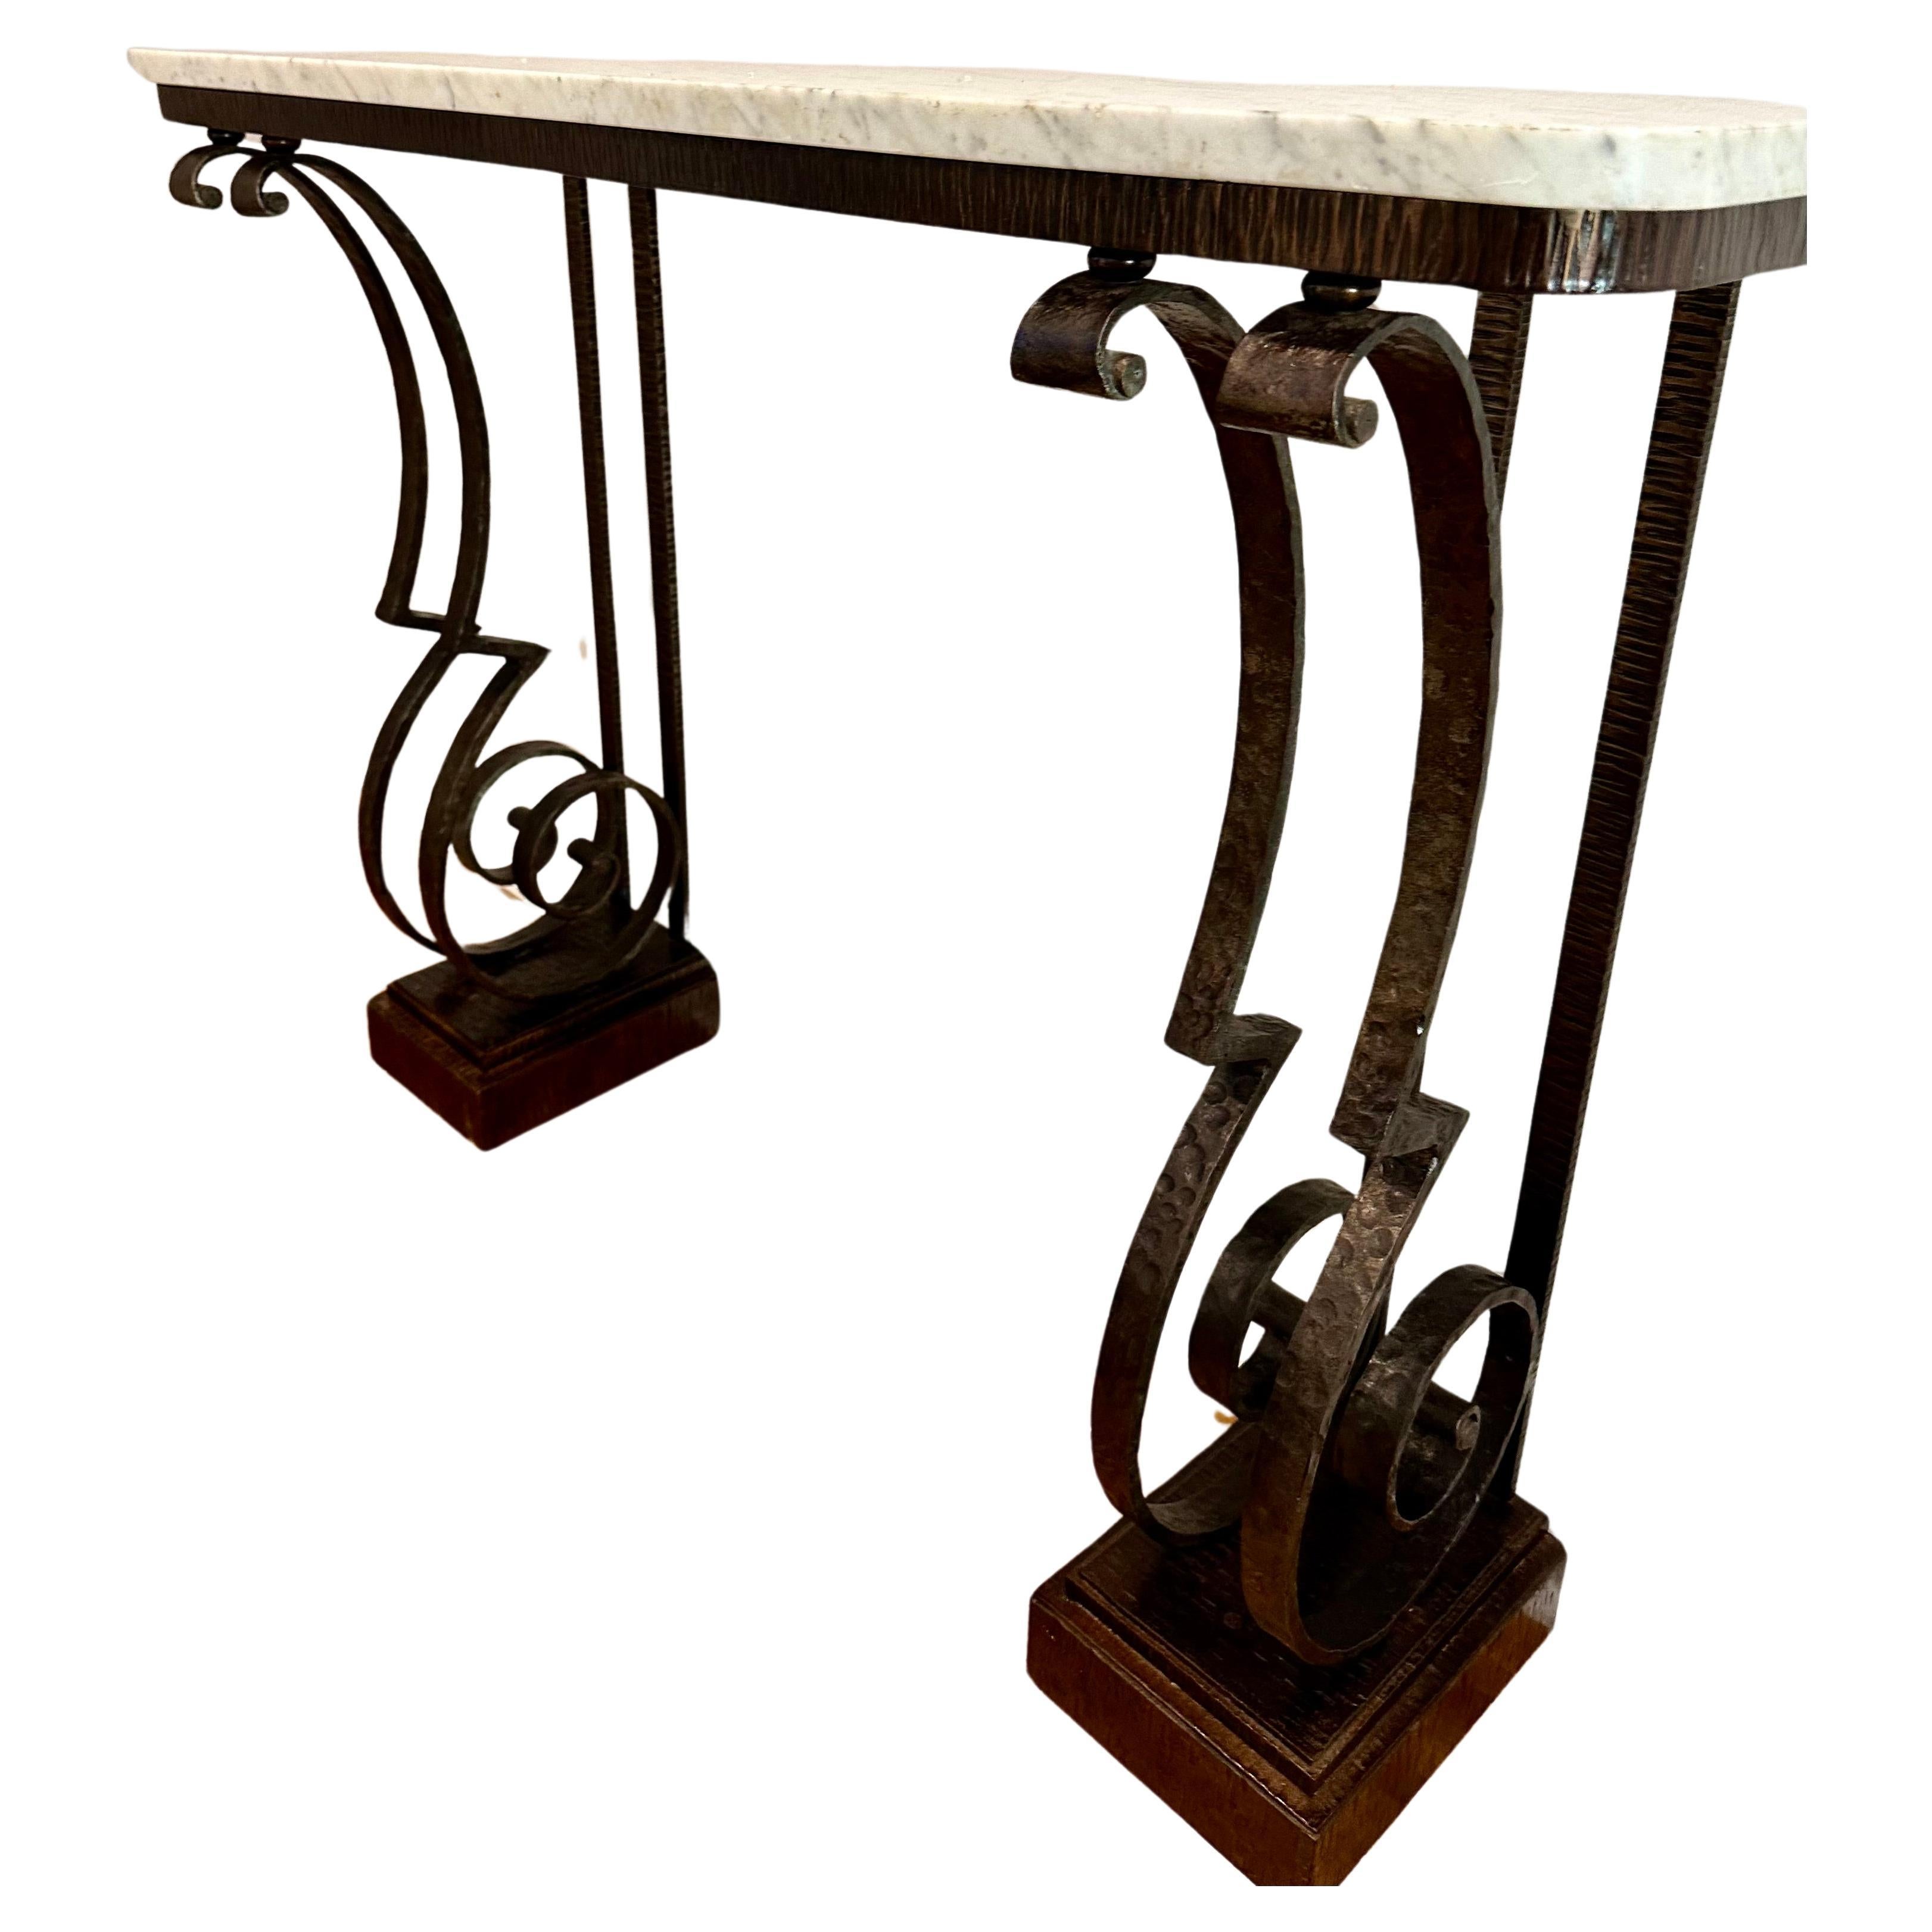 Raymond Subes Attributed Wrought-Iron Hand-Hammered Console Table, ca. 1930’s